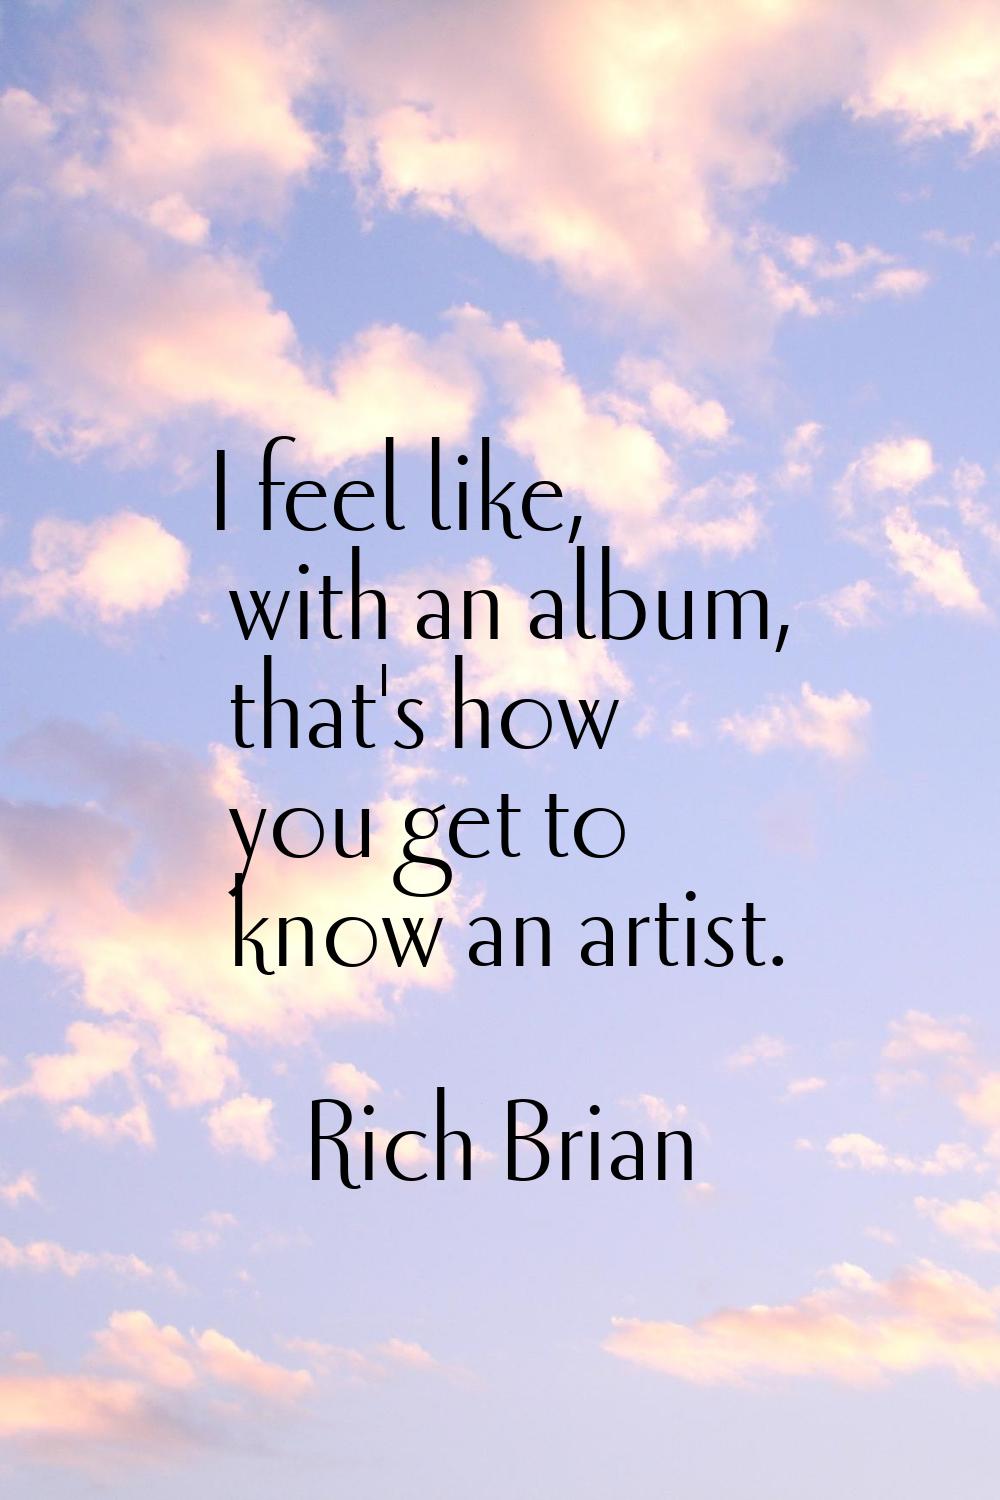 I feel like, with an album, that's how you get to know an artist.